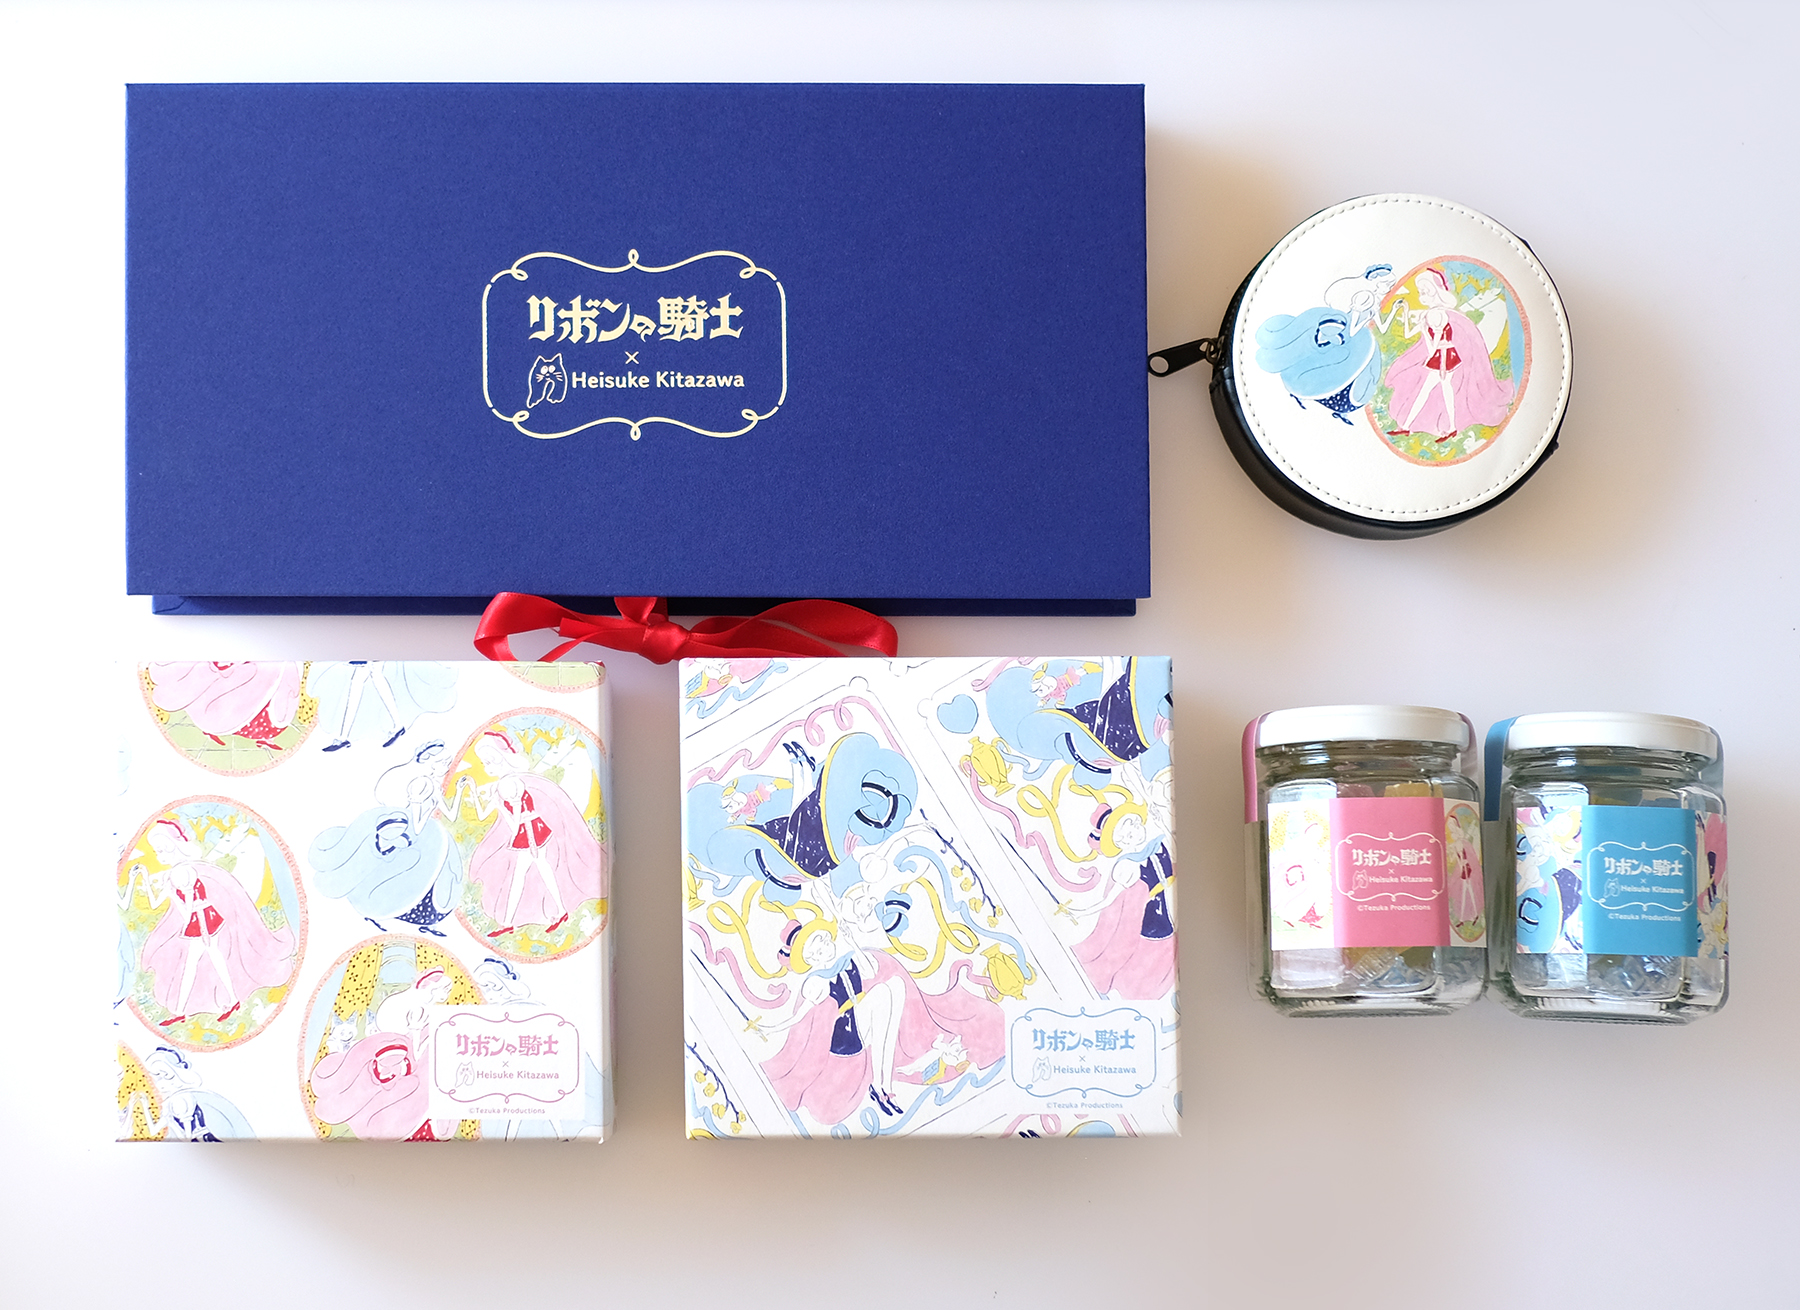 Beyond: Alice in Wonderland Makeup Collection 